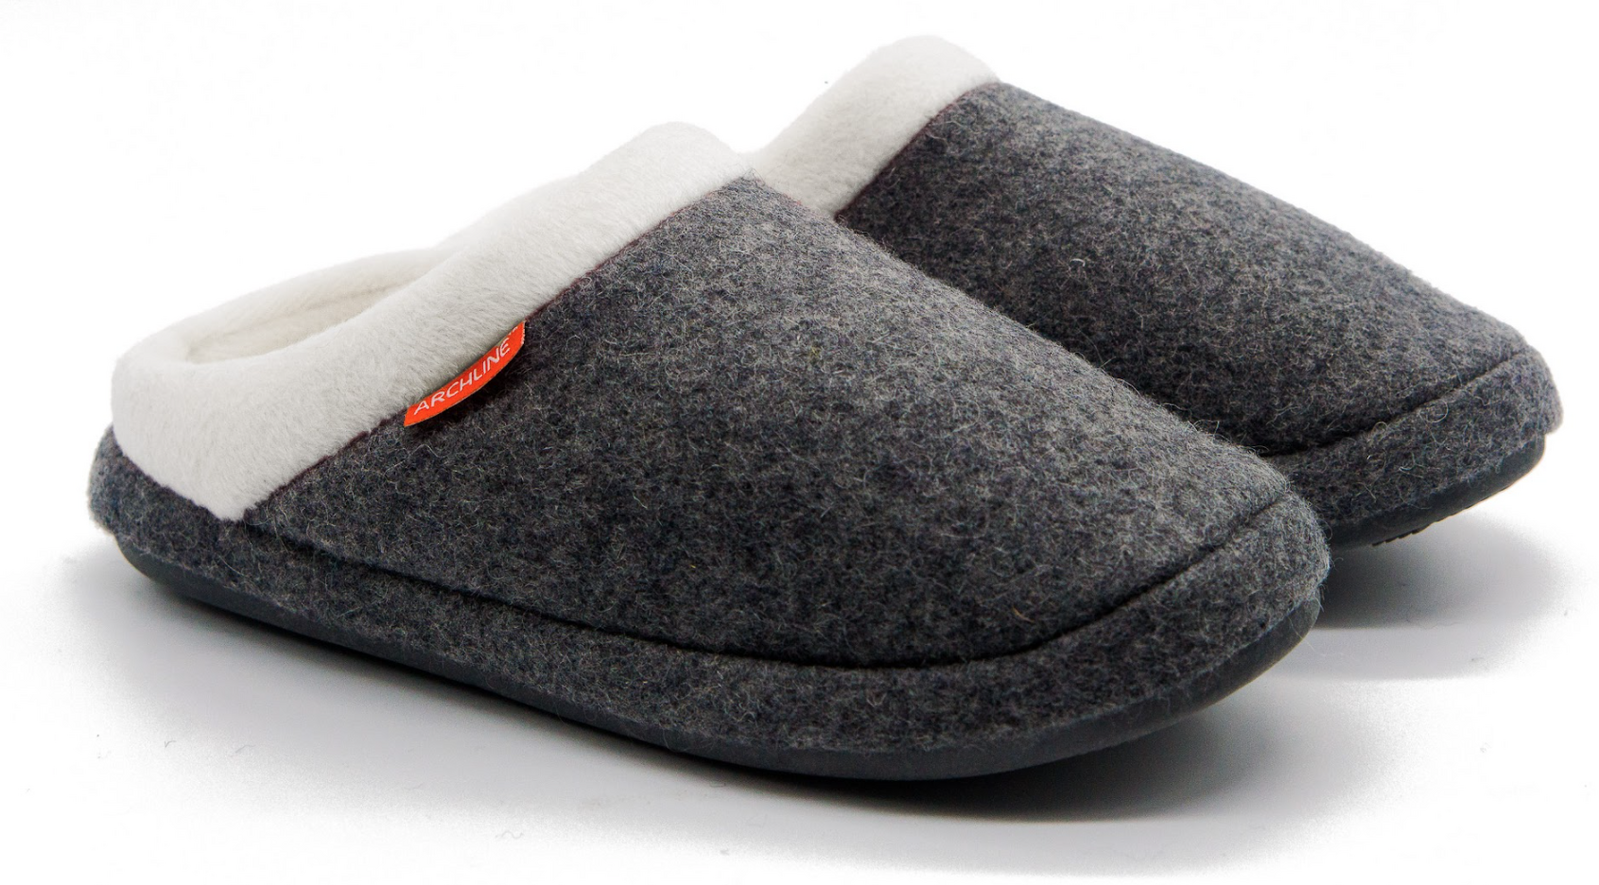 Orthotic Slippers Slip On Arch Scuffs Orthopedic Moccasins - Grey Marle - EUR 39